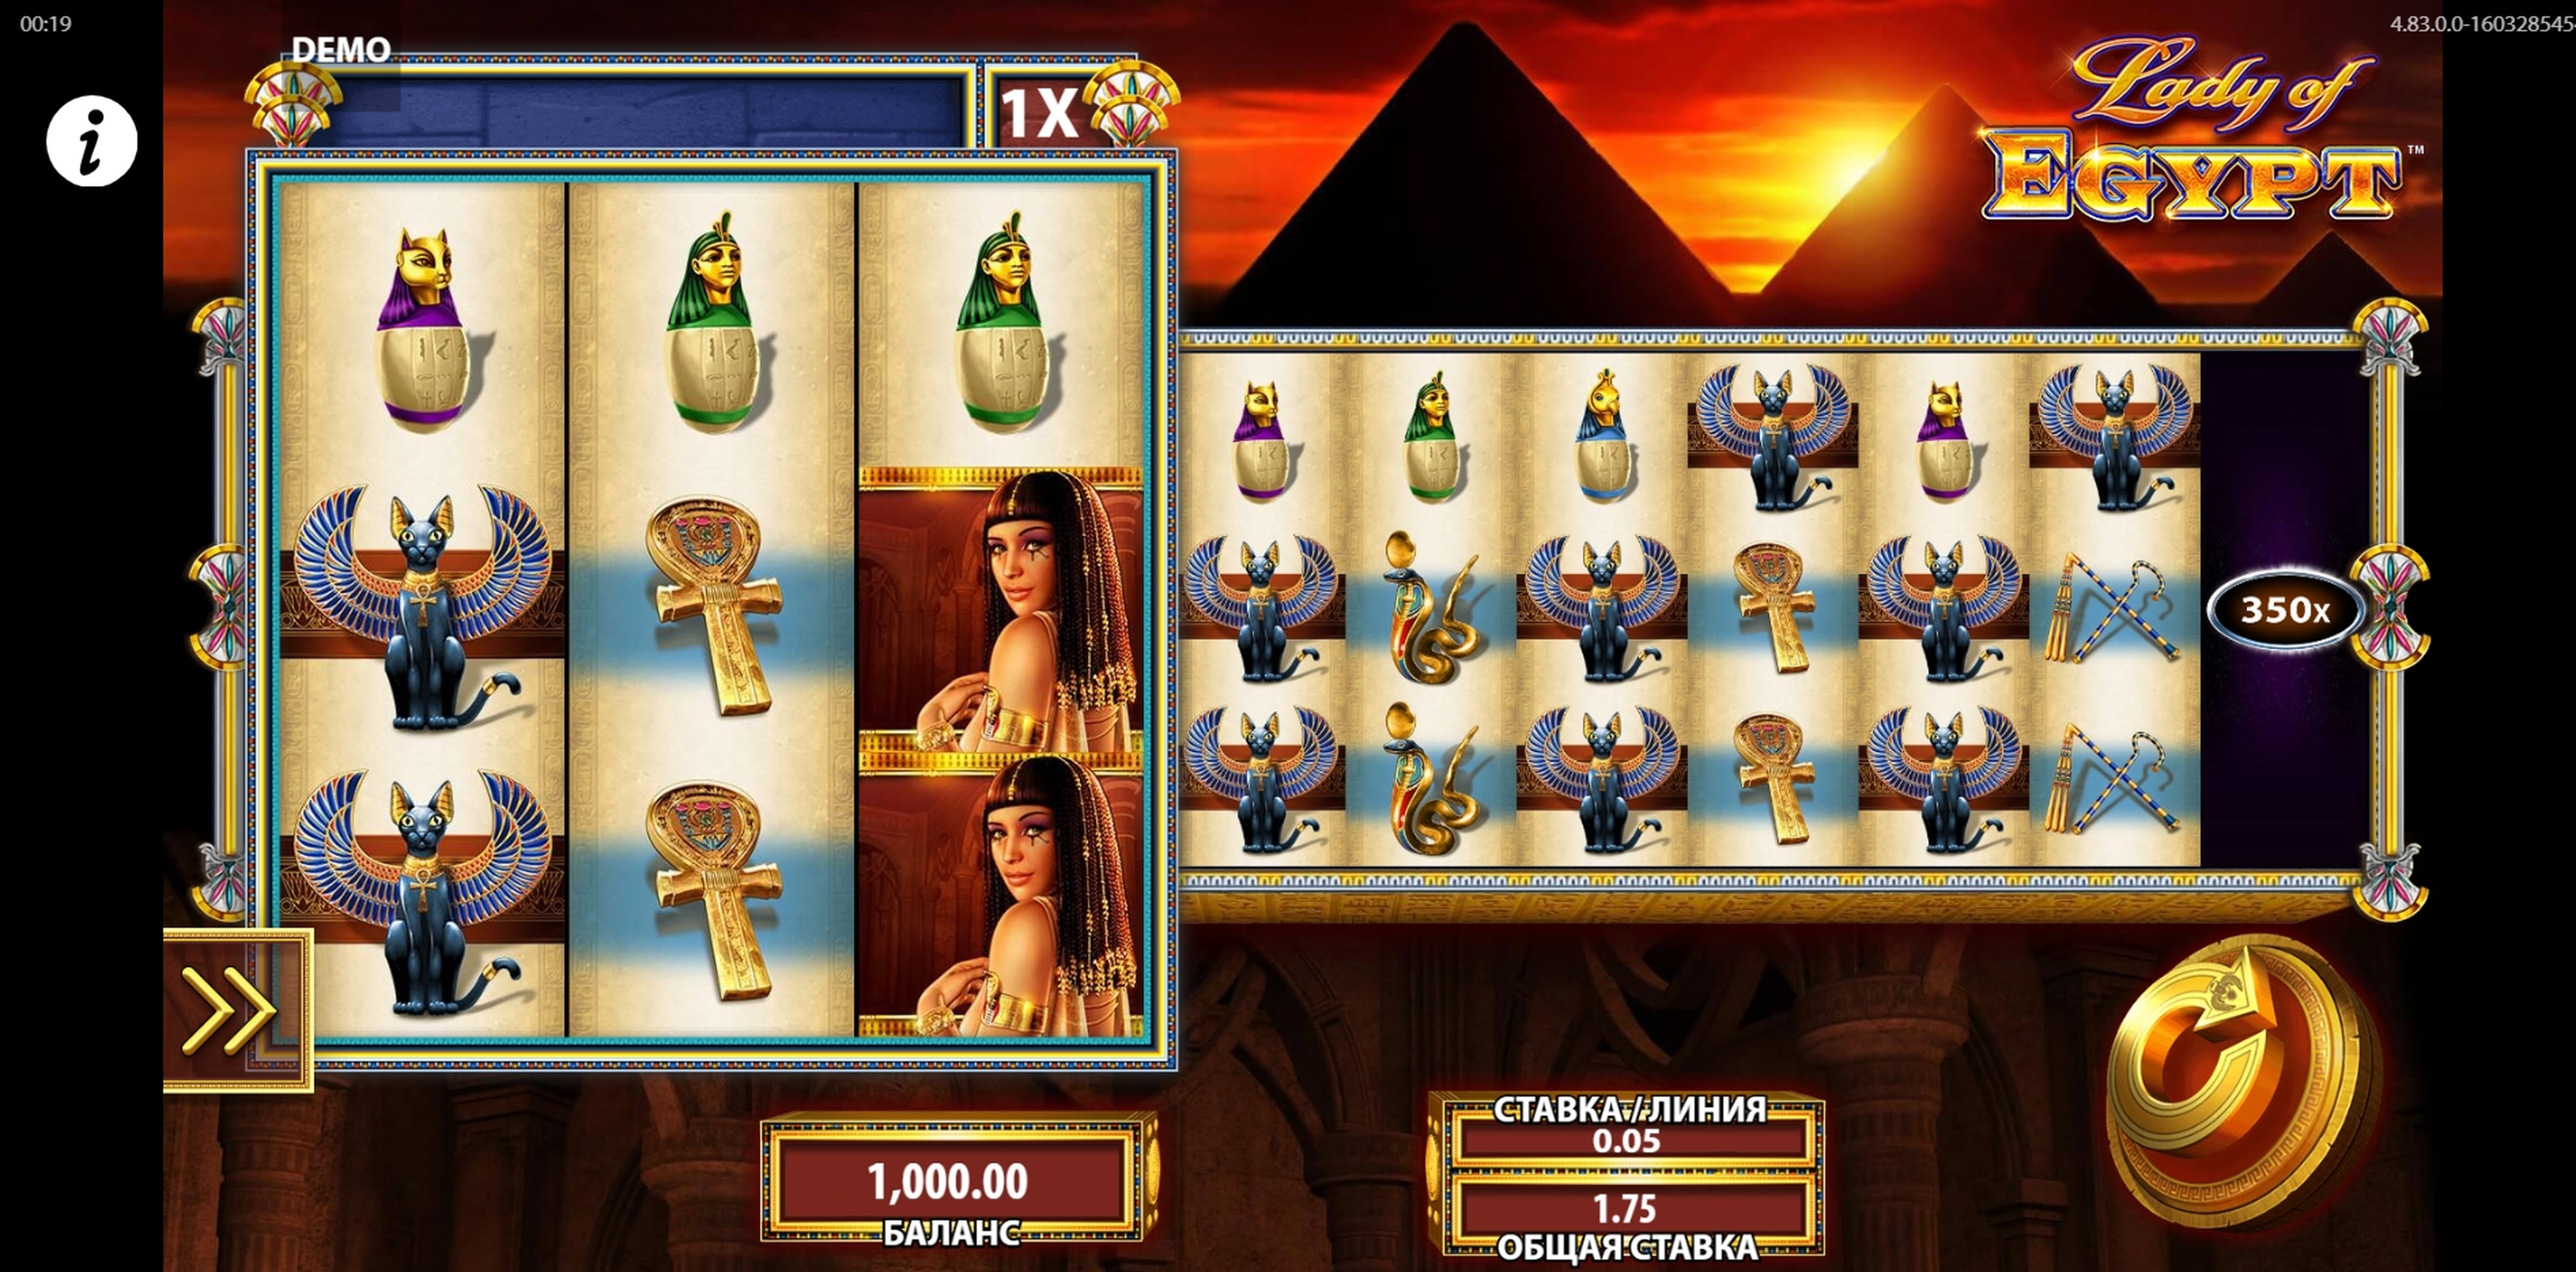 Reels in Lady of Egypt Slot Game by WMS